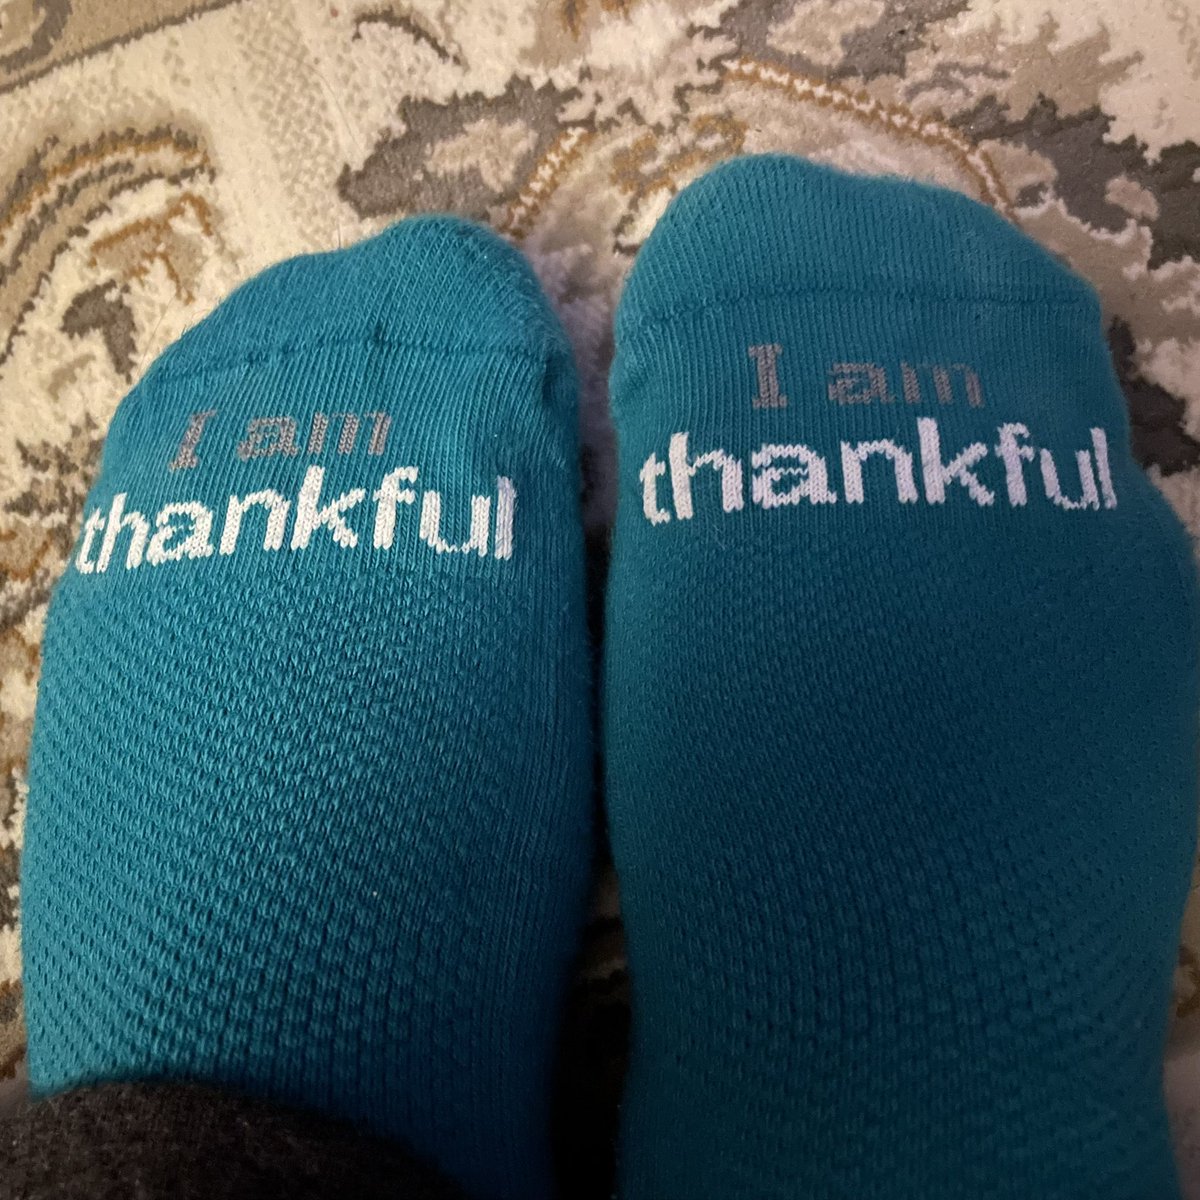 How I choose to enter a new week. 
#Thankful #notestoselfsocks